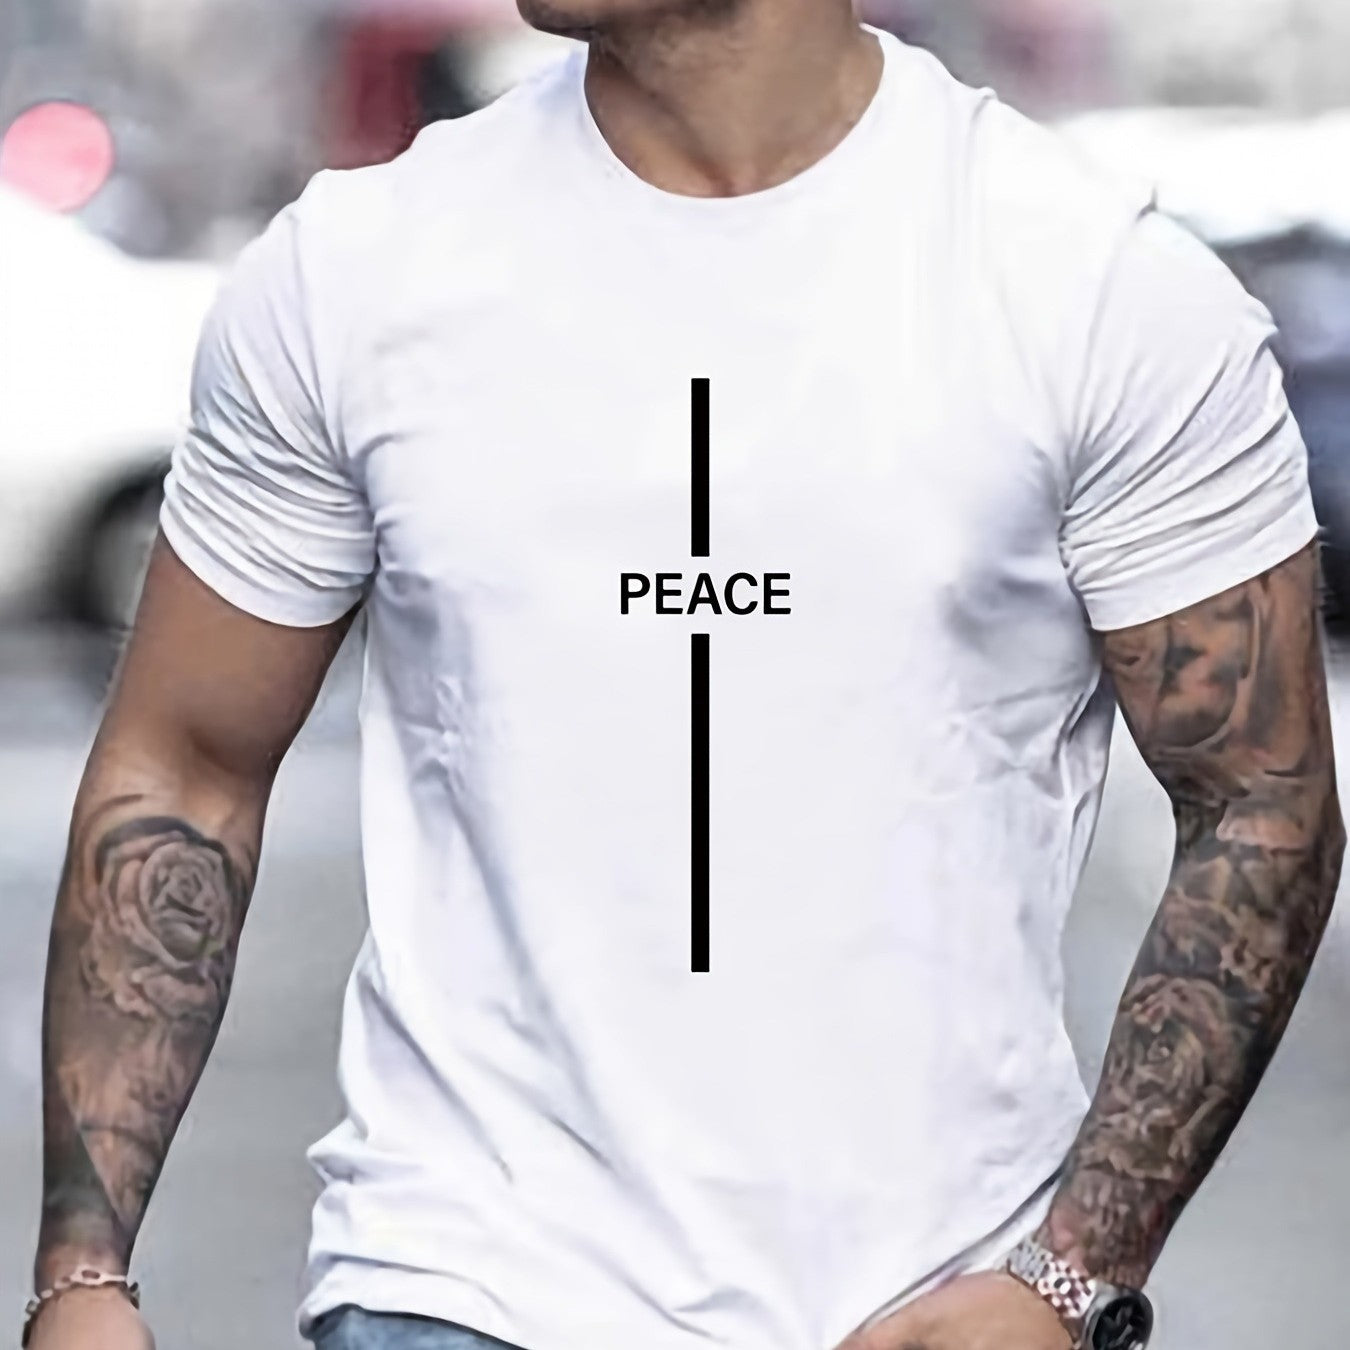 T Shirt With Peace Print Short